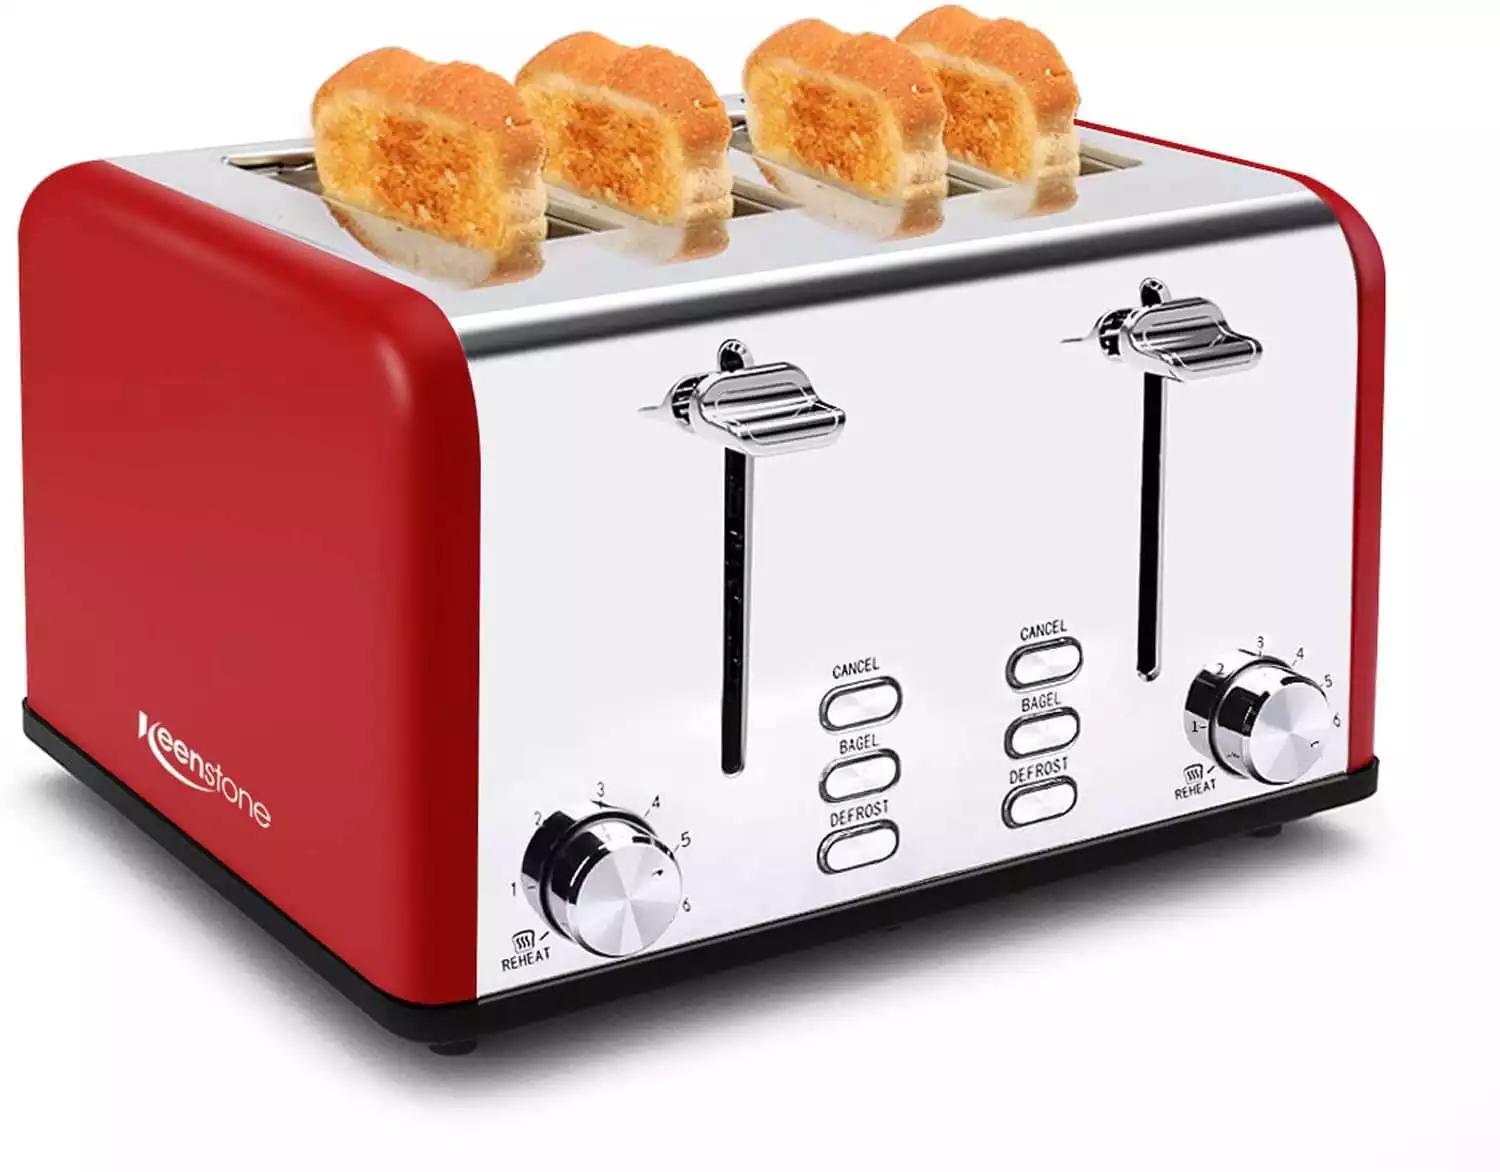 Toaster 4 Slice, Keenstone Stainless Steel Bagel Toaster with Wide Slot